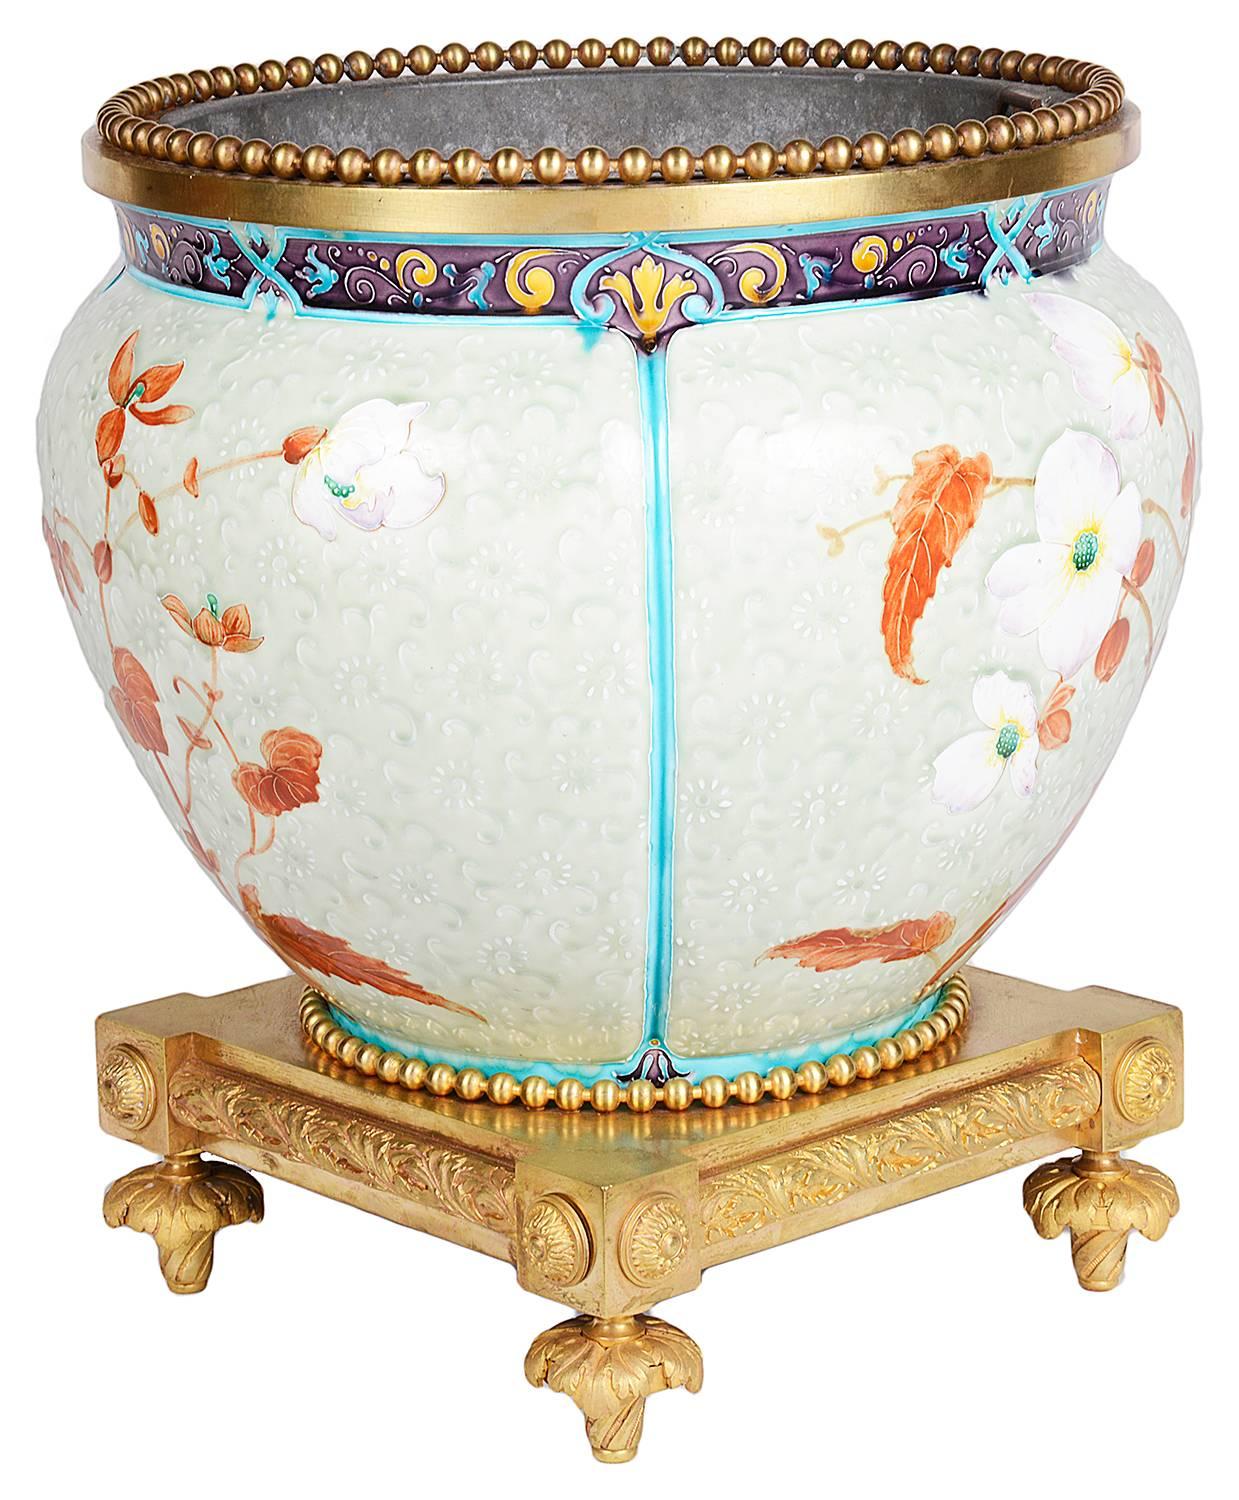 A fine quality French mid-19th Century enamel porcelain, ormolu-mounted jardinière, having Japanese style flowers and motifs. In the style of Theodore Deck (1823-1891)